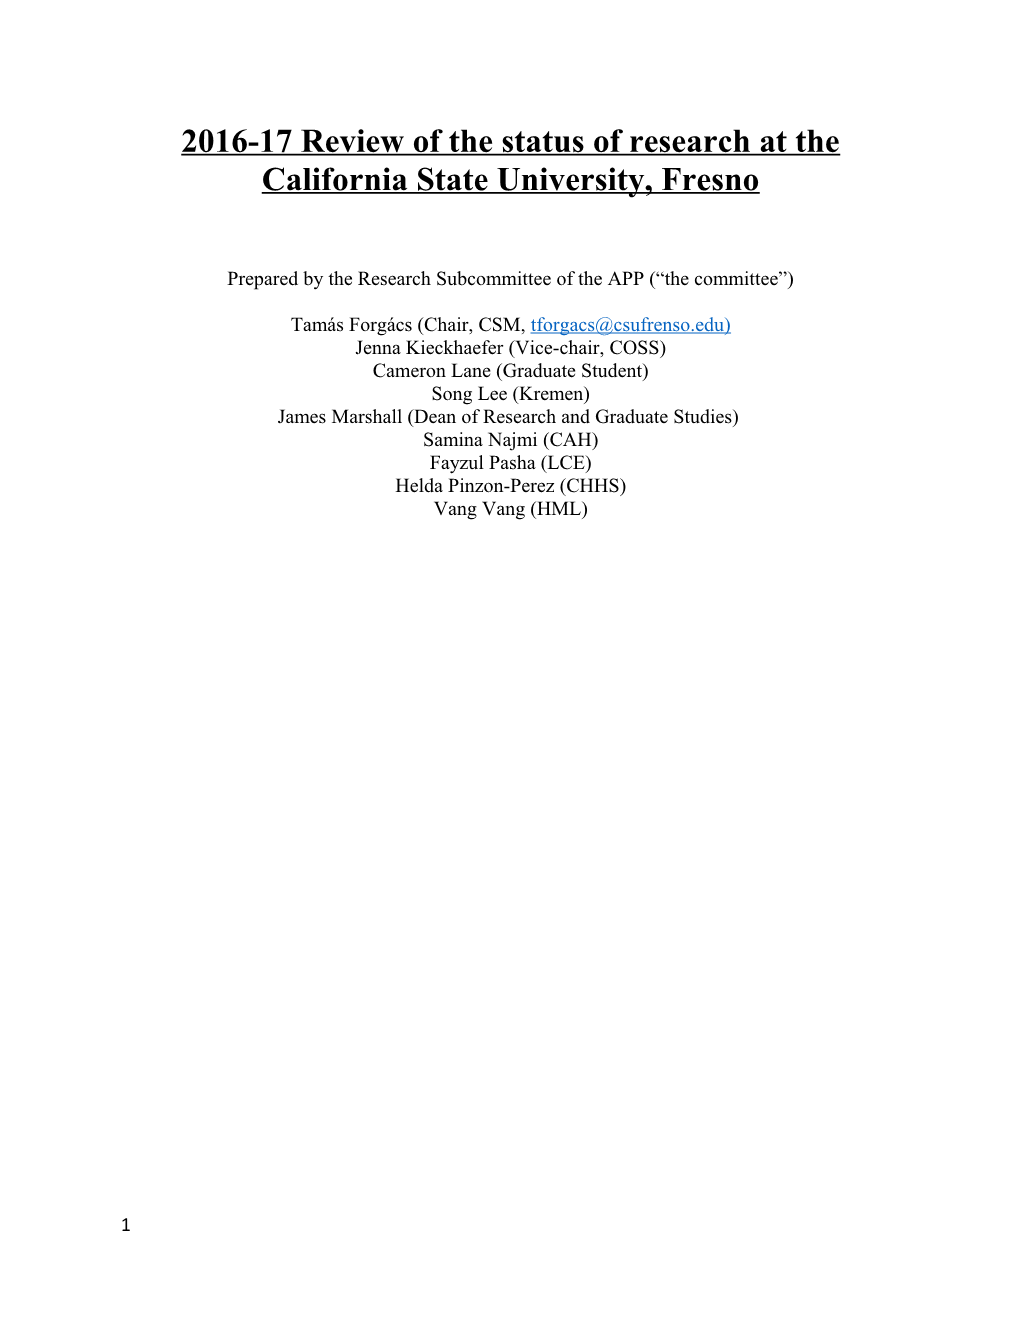 2016-17 Review of the Status of Research at the California State University, Fresno